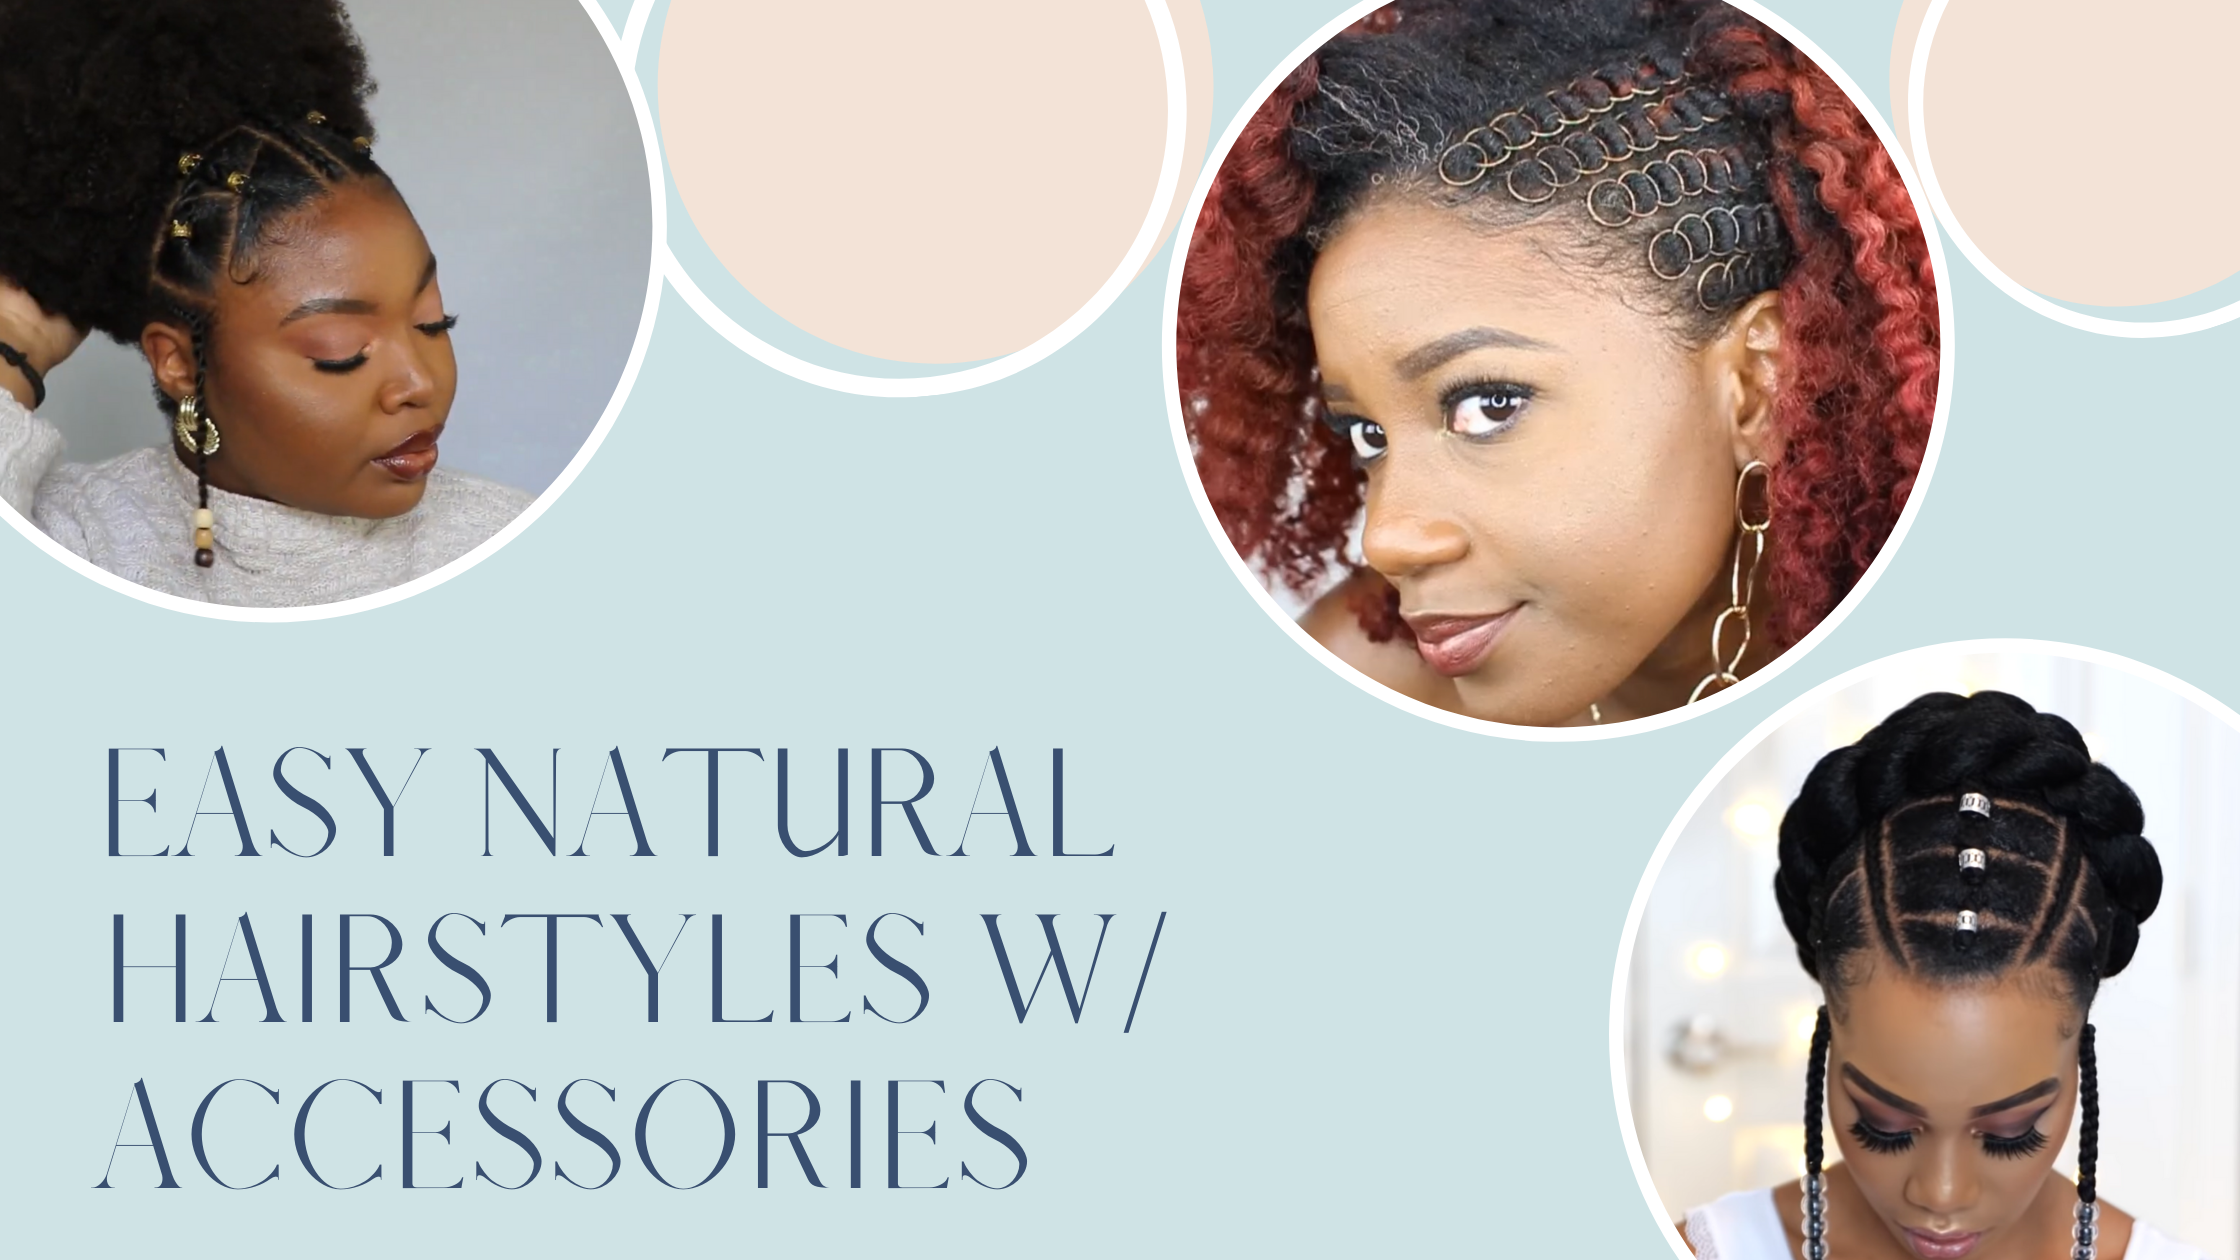 Top Natural Hairstyles To Wear For Any Occasion With Accessories ⋆ African  American Hairstyle Videos - AAHV